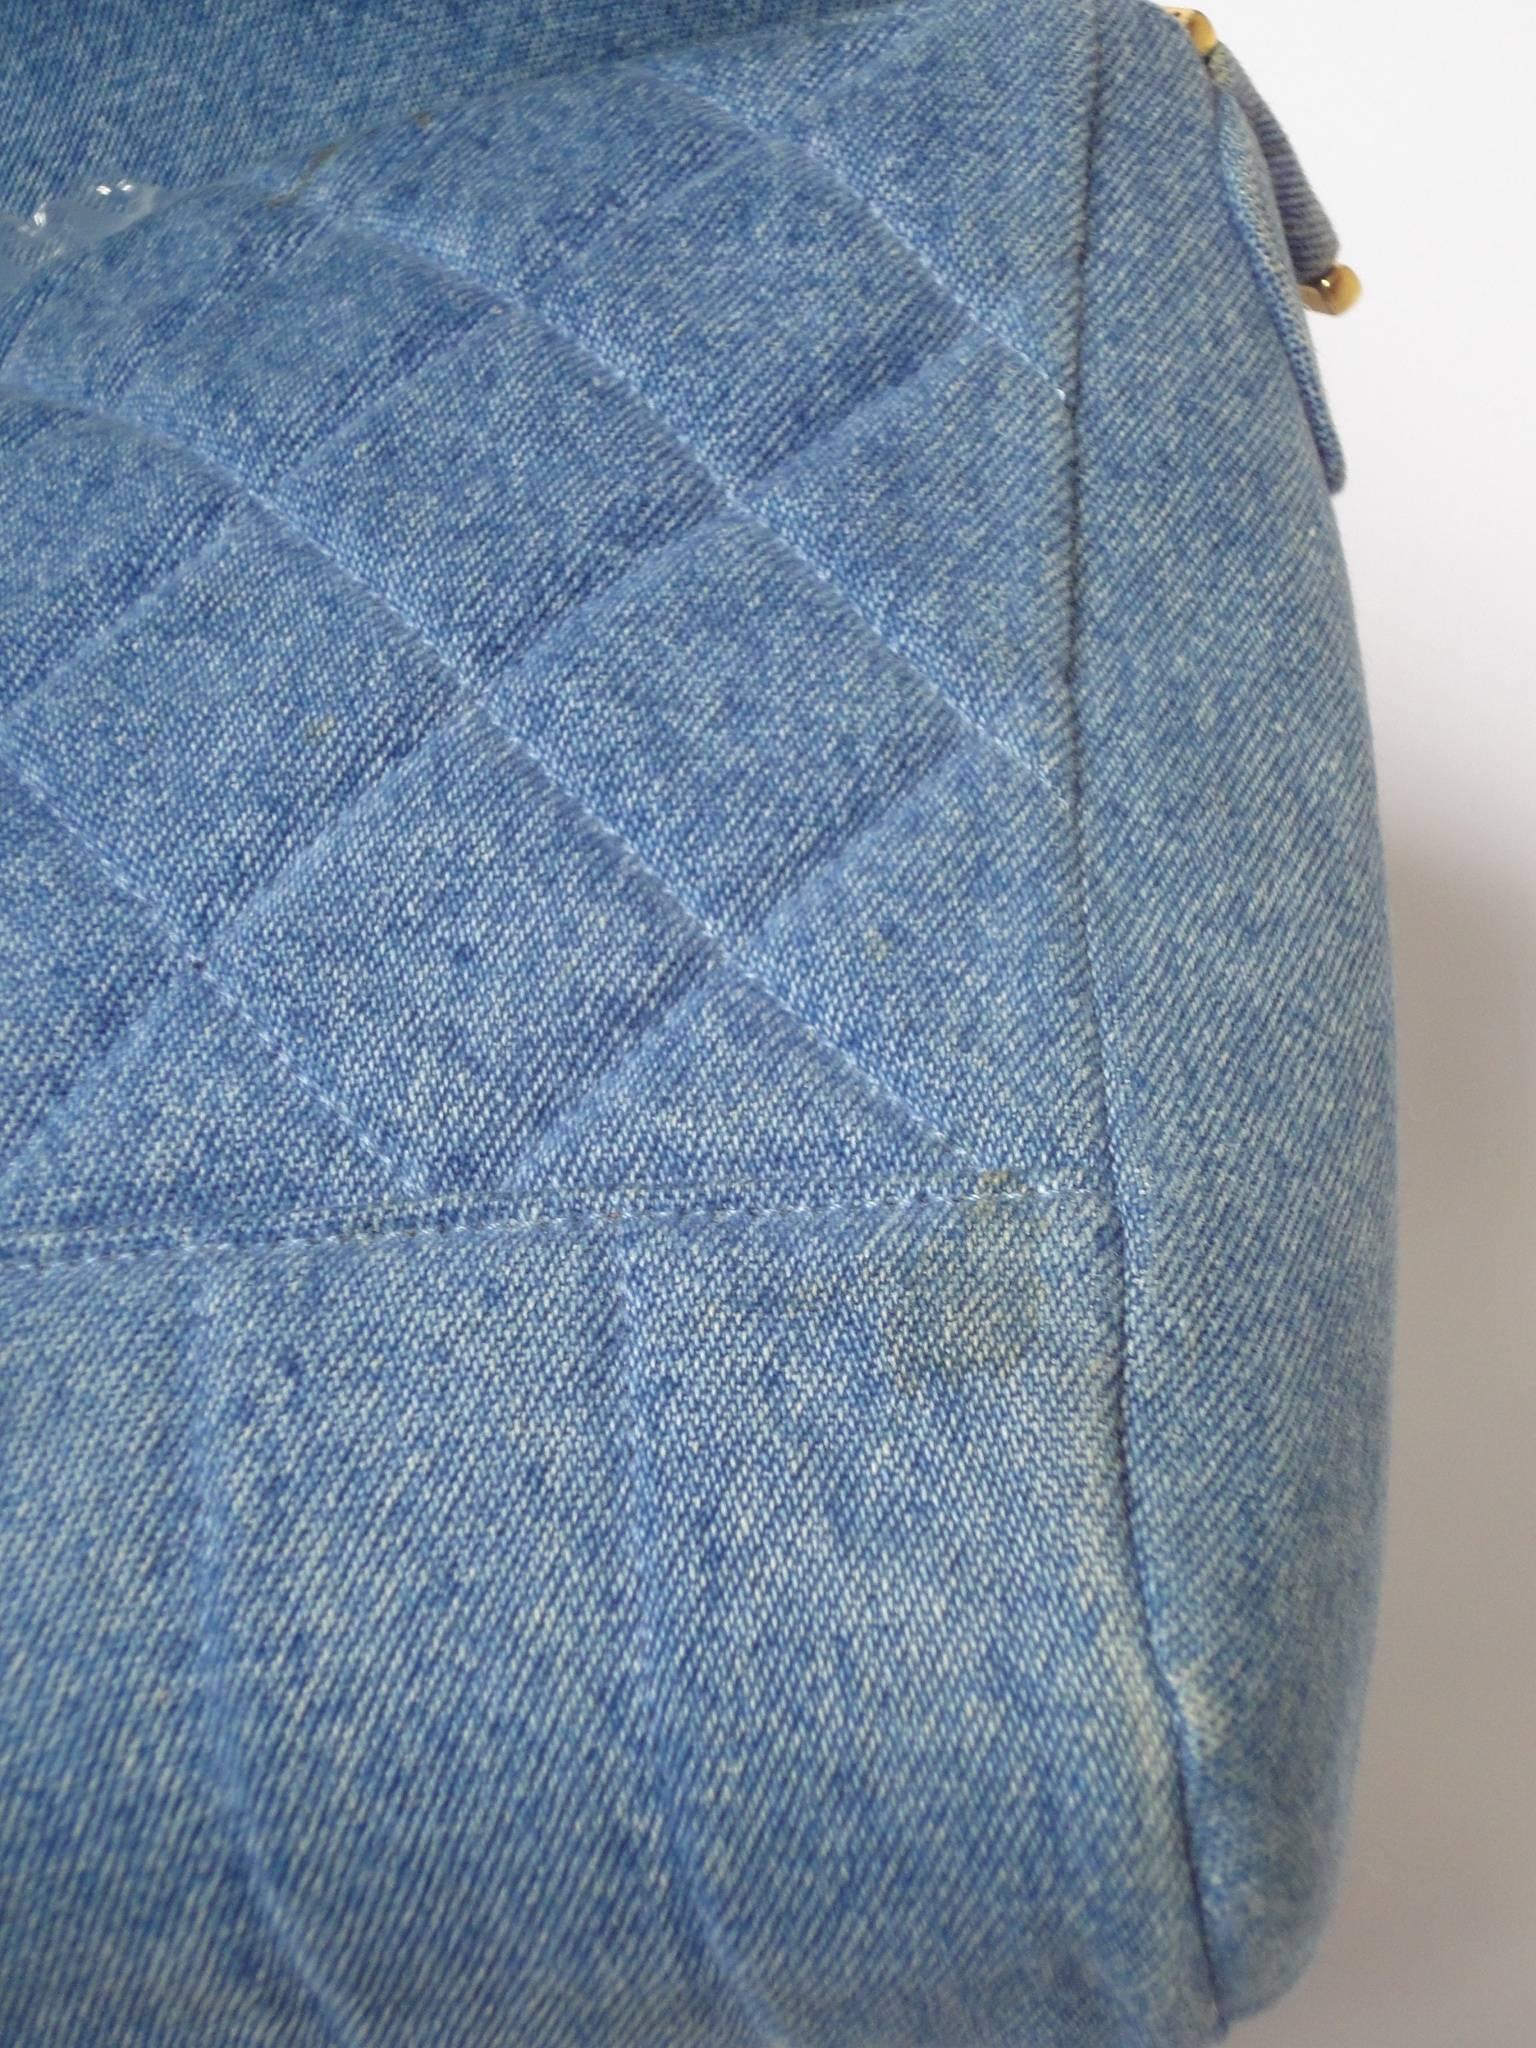 Women's Vintage CHANEL denim bag with golden cc closure and vertical stitches. 